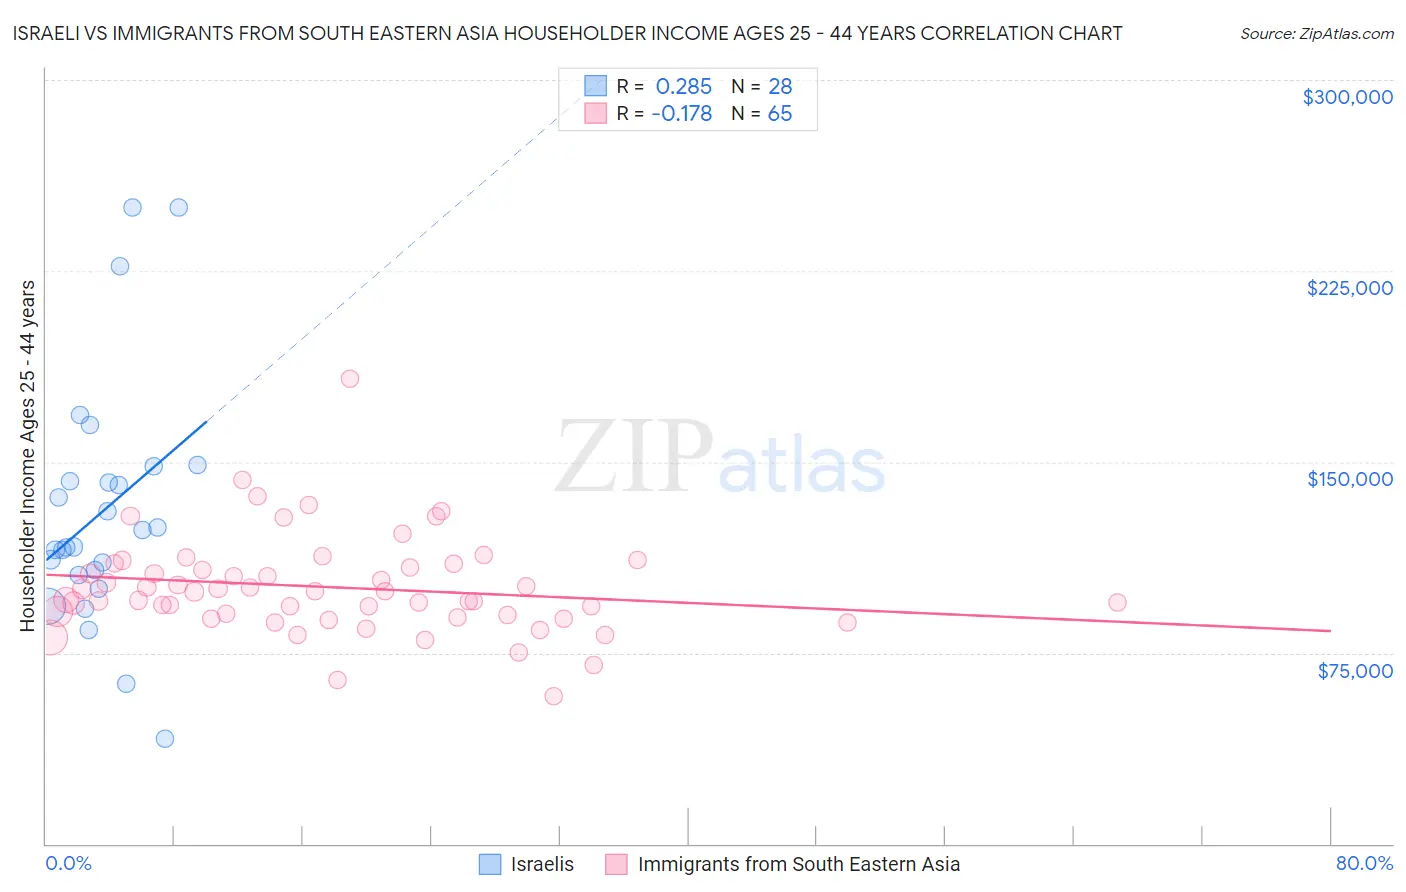 Israeli vs Immigrants from South Eastern Asia Householder Income Ages 25 - 44 years